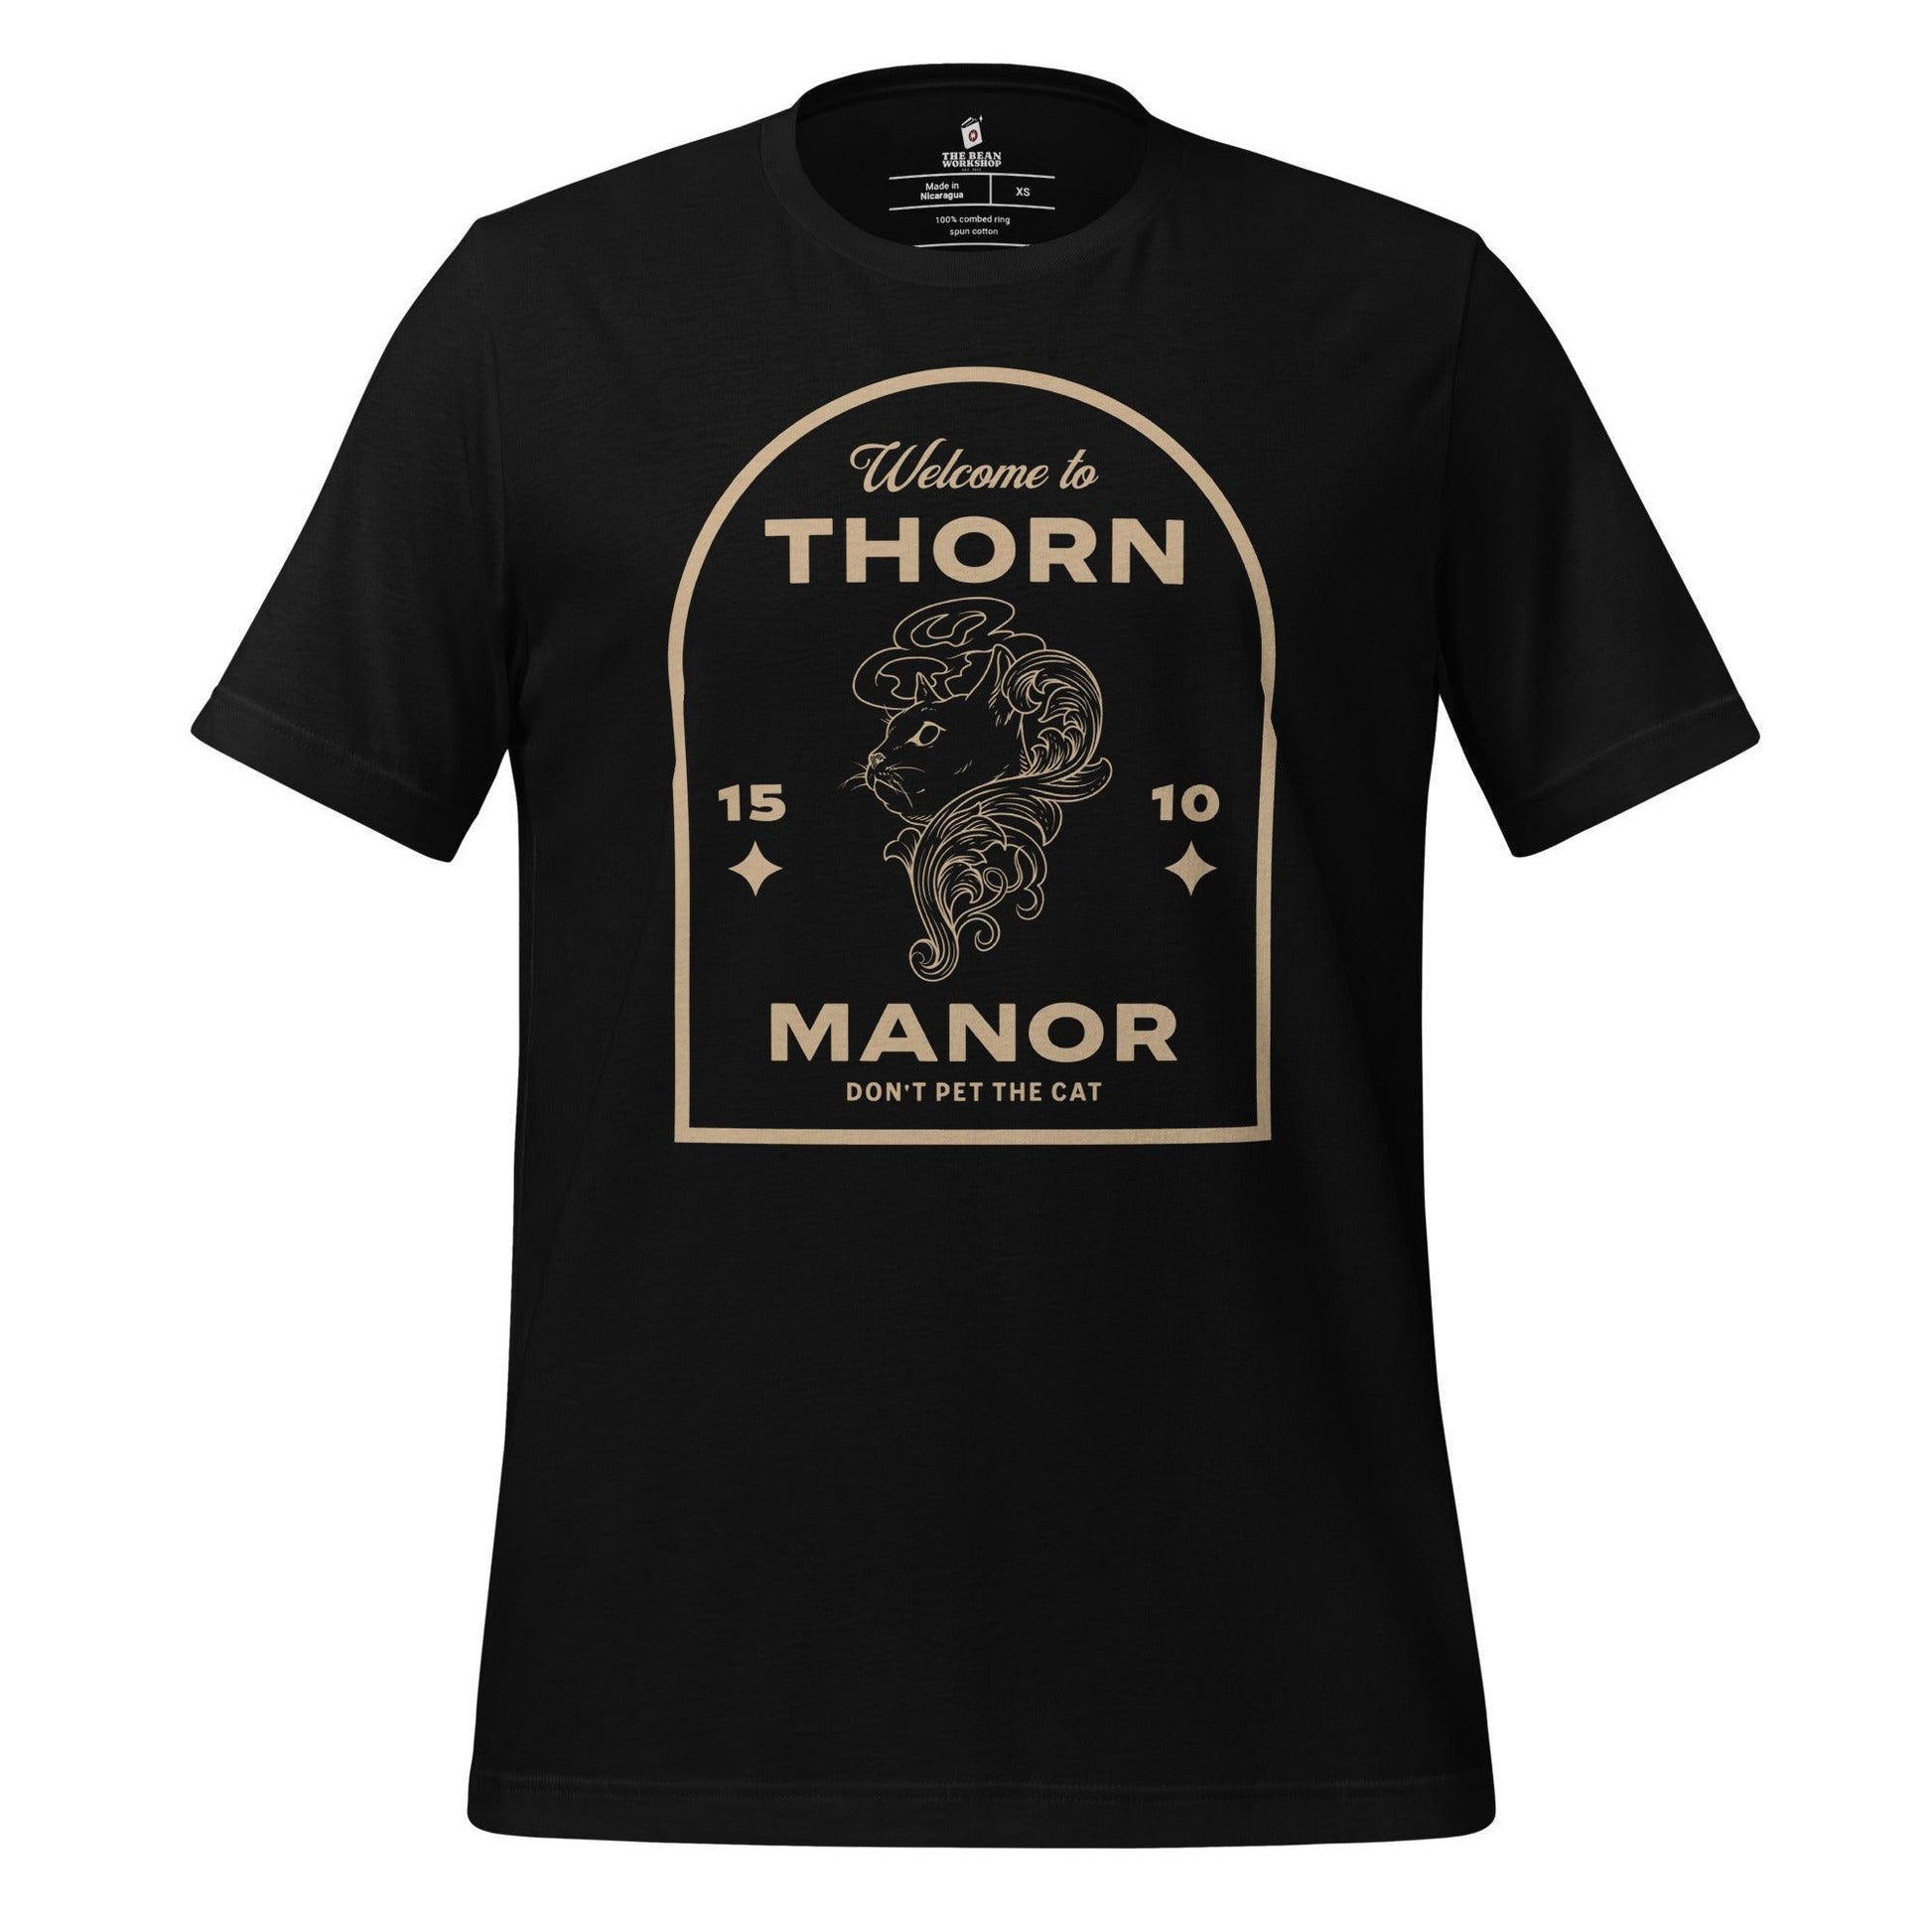 Thorn Manor T-shirt - The Bean Workshop - margaret rogerson, sorcery of thorns, t-shirt